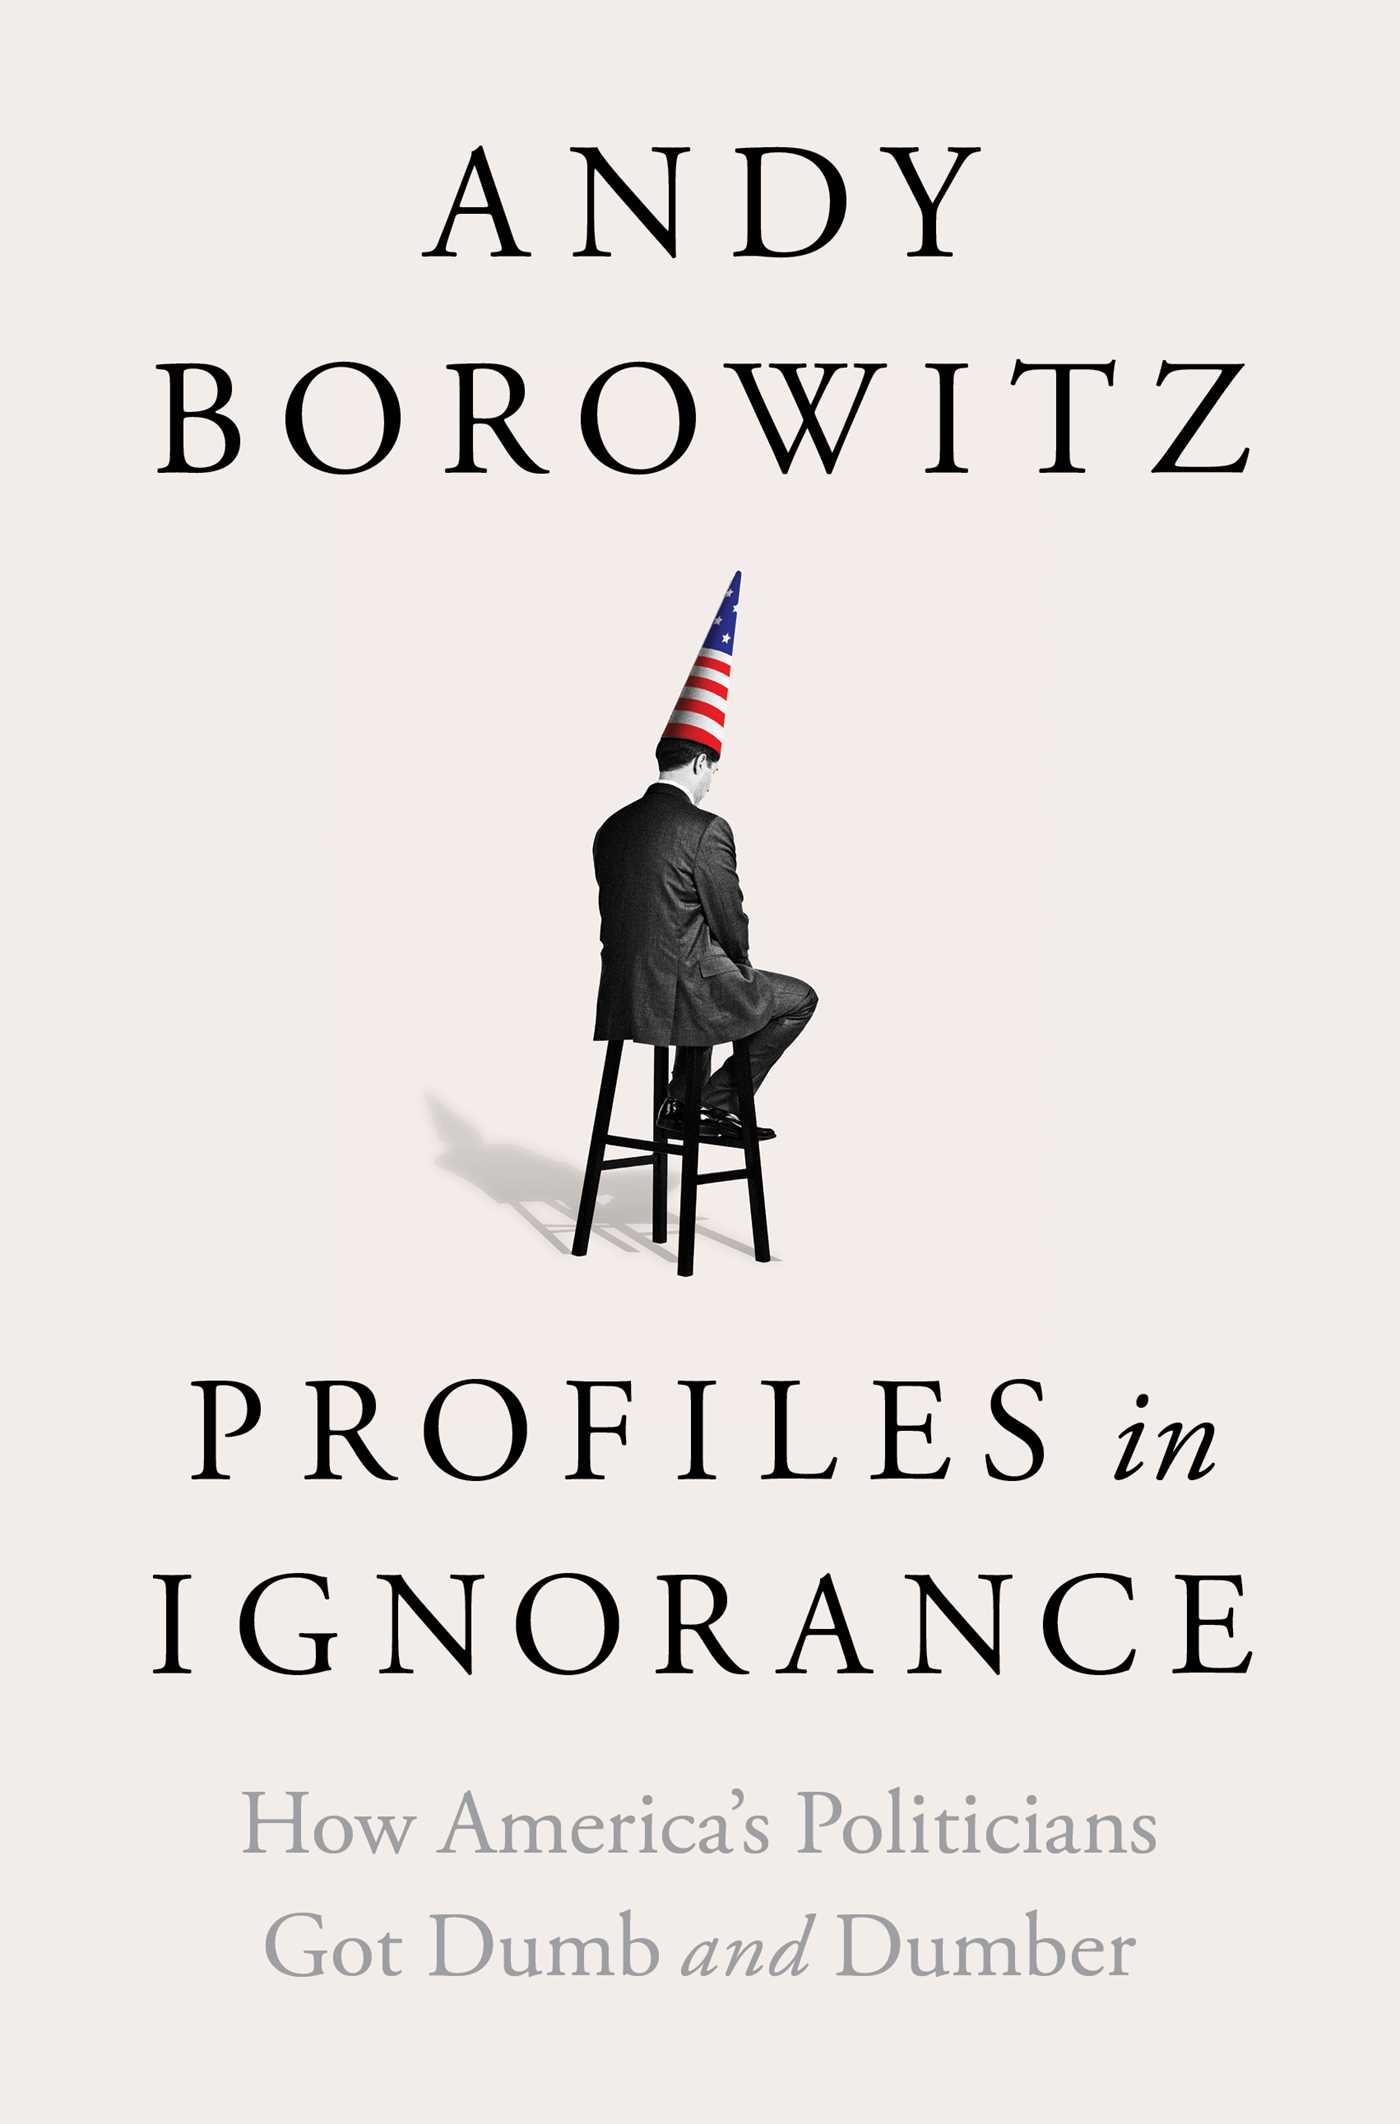 Image for "Profiles in Ignorance"